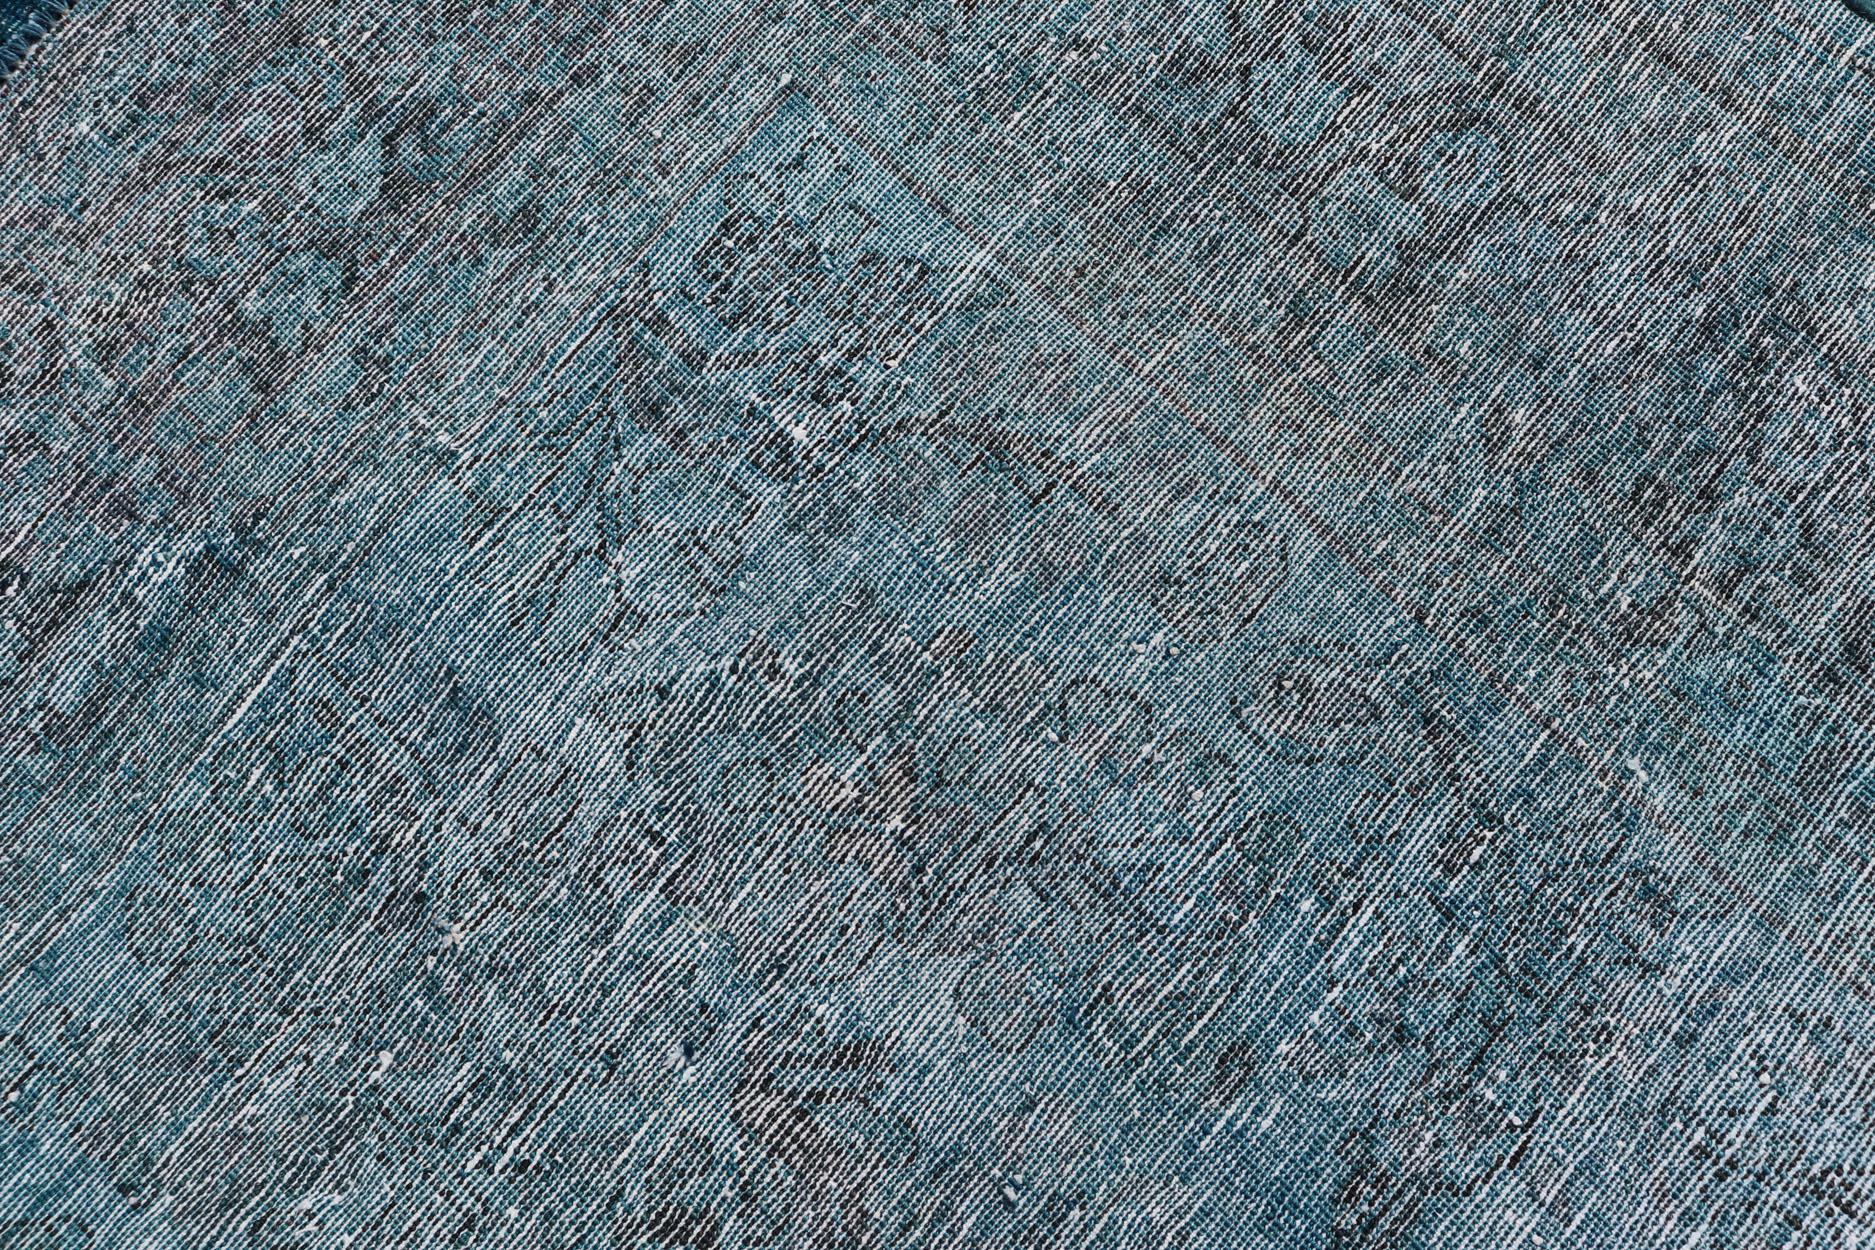 Hand-Knotted Luxurious Modern Design Vintage Rug in Shades of Blue, Turquoise, Teal and Green For Sale